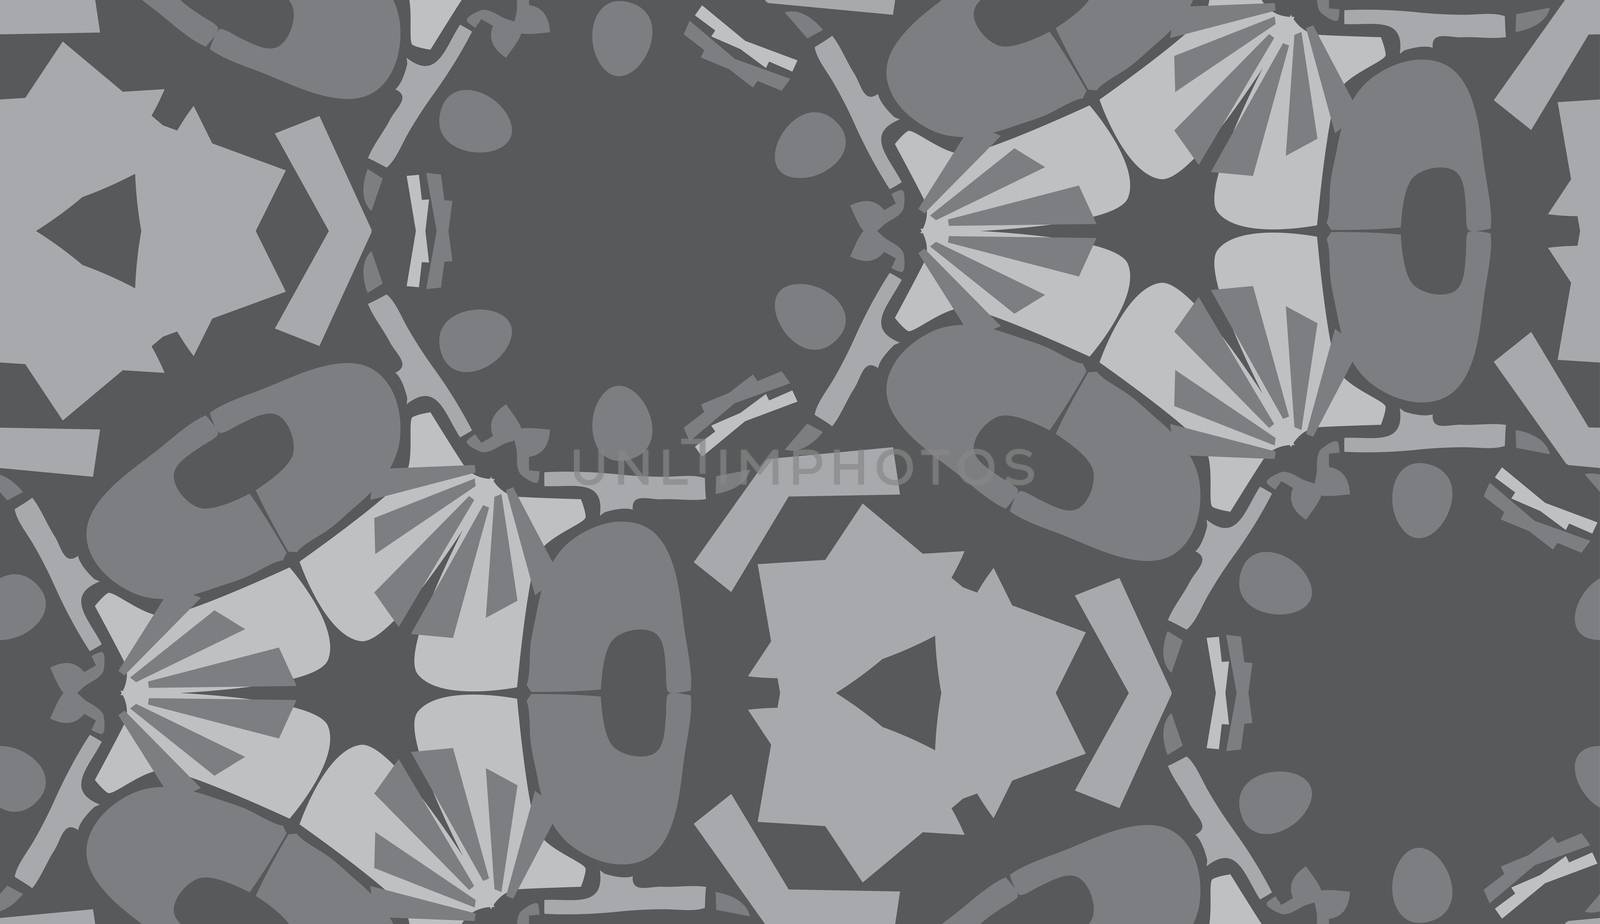 Repeating Gray Wallpaper Pattern by TheBlackRhino